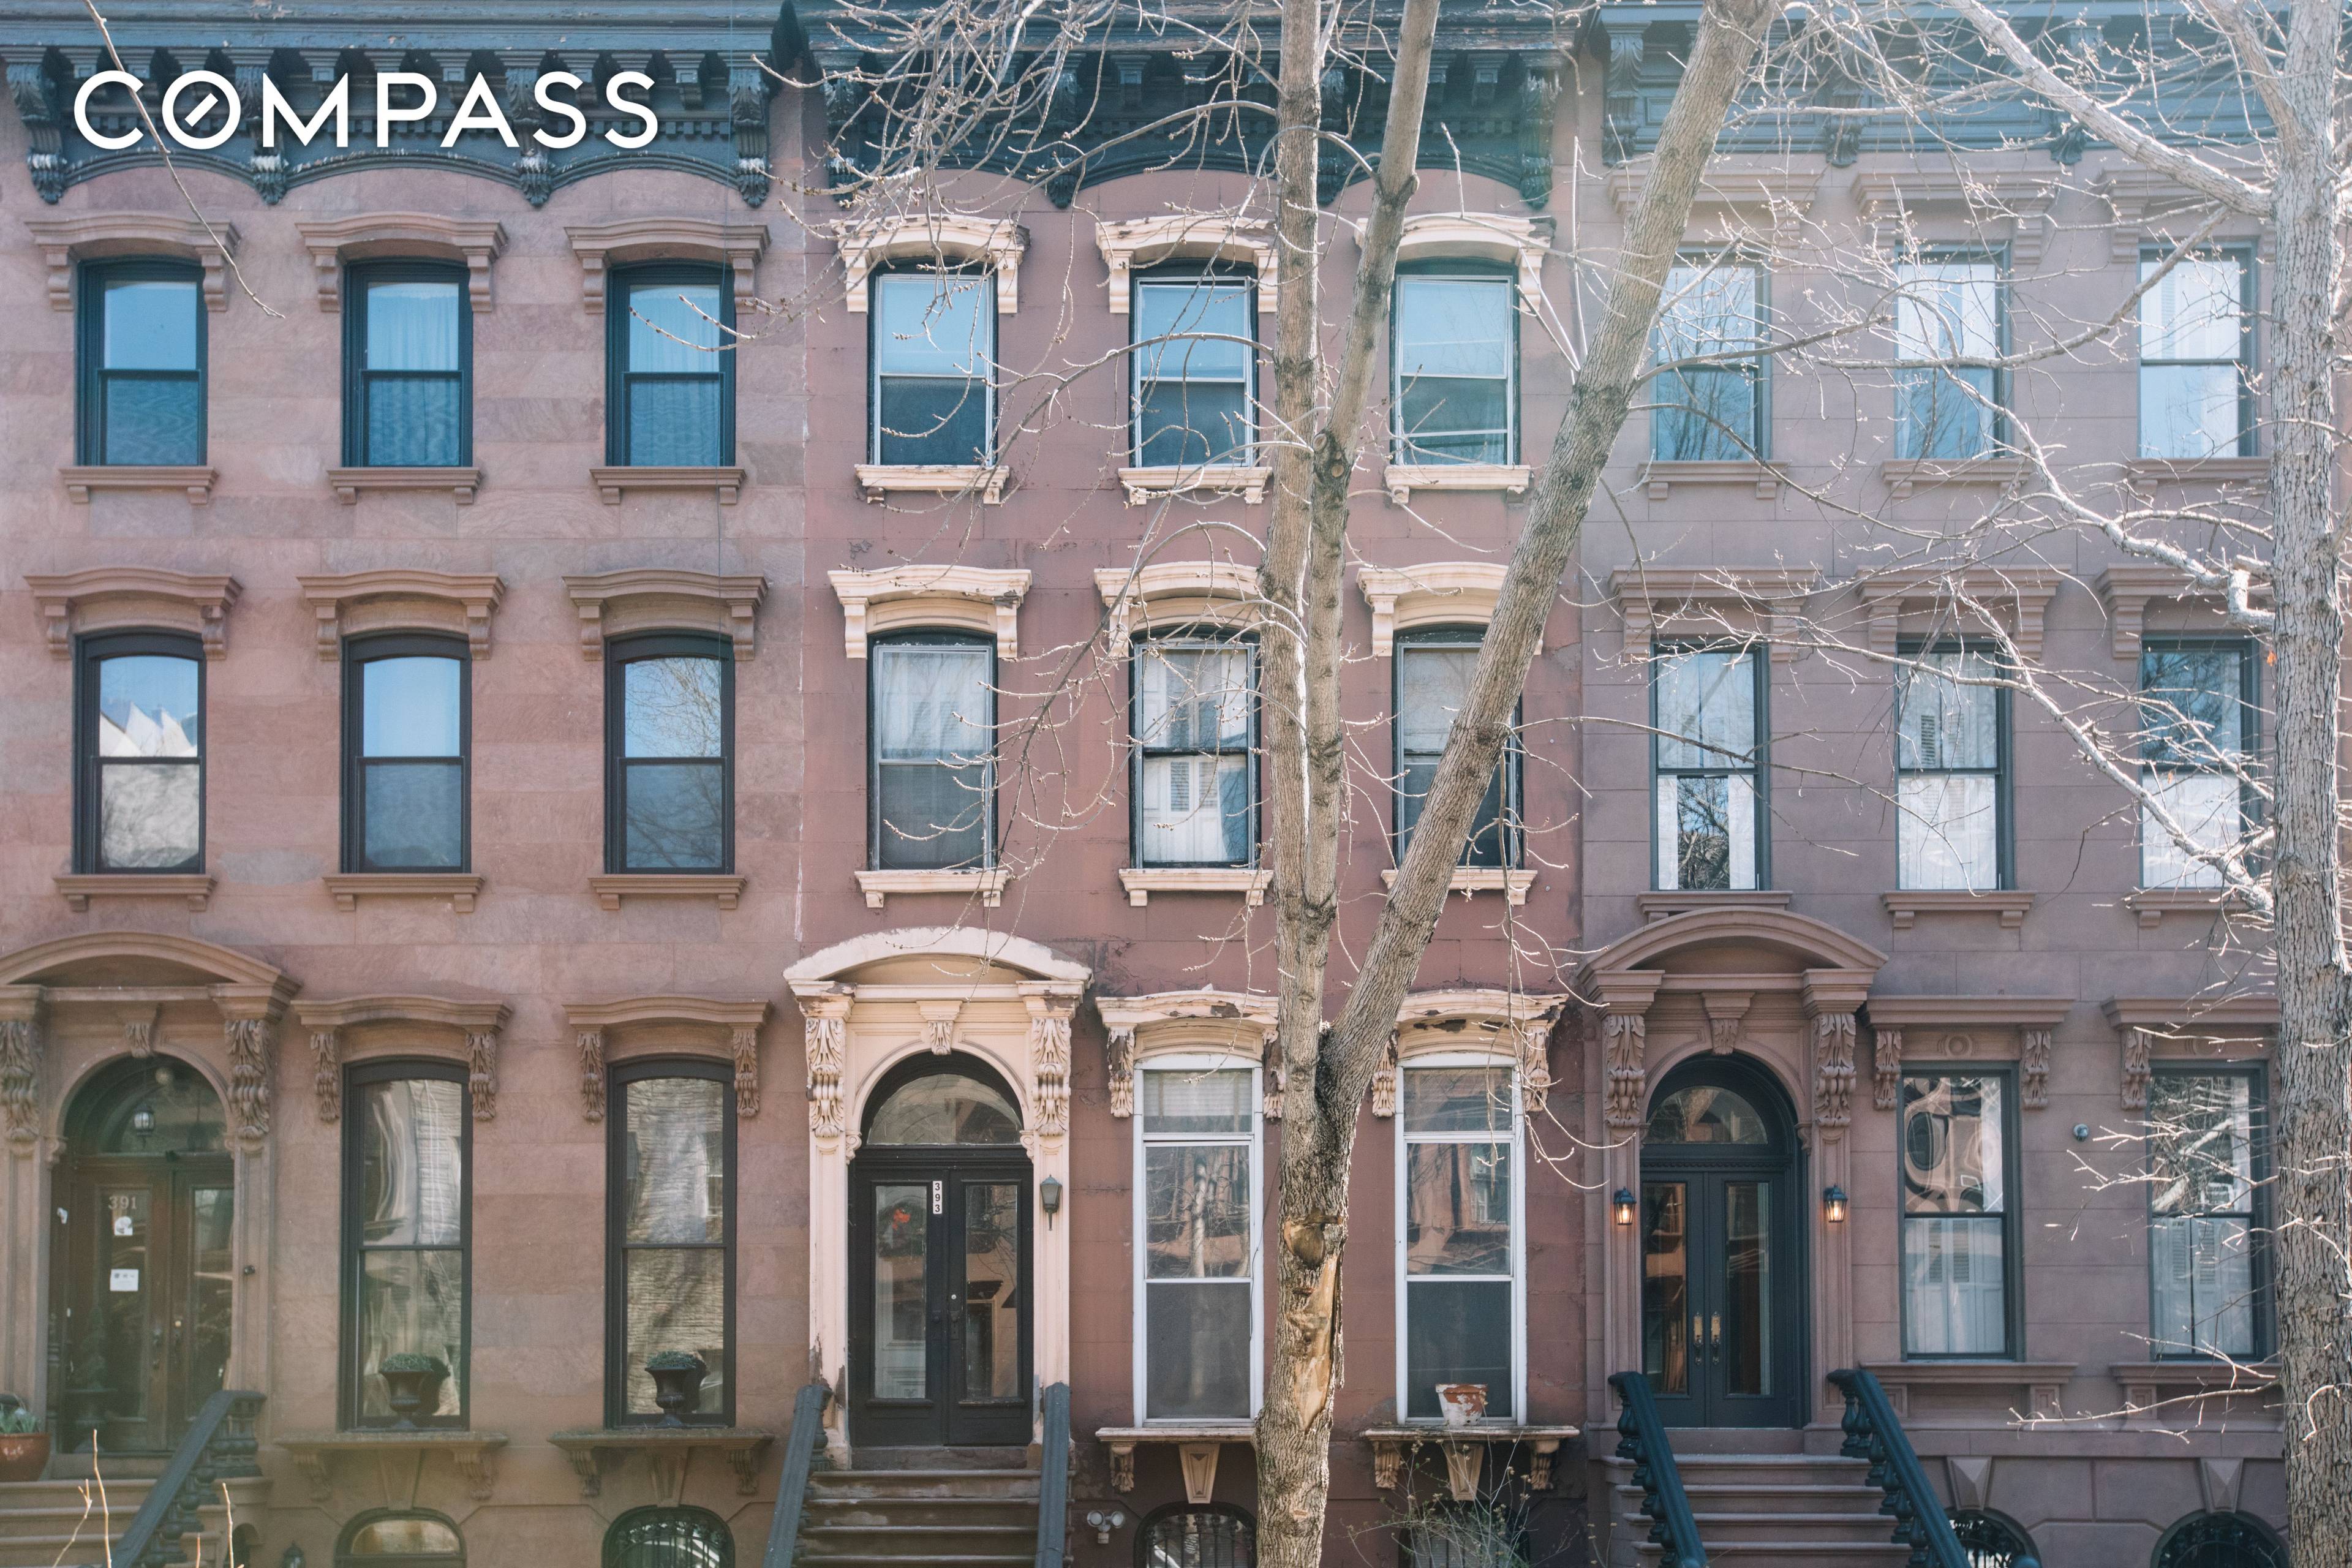 Opportunity awaits ! Bring your architect and contractor and envision a grand Italianate Brownstone on the prettiest block in Clinton Hill.